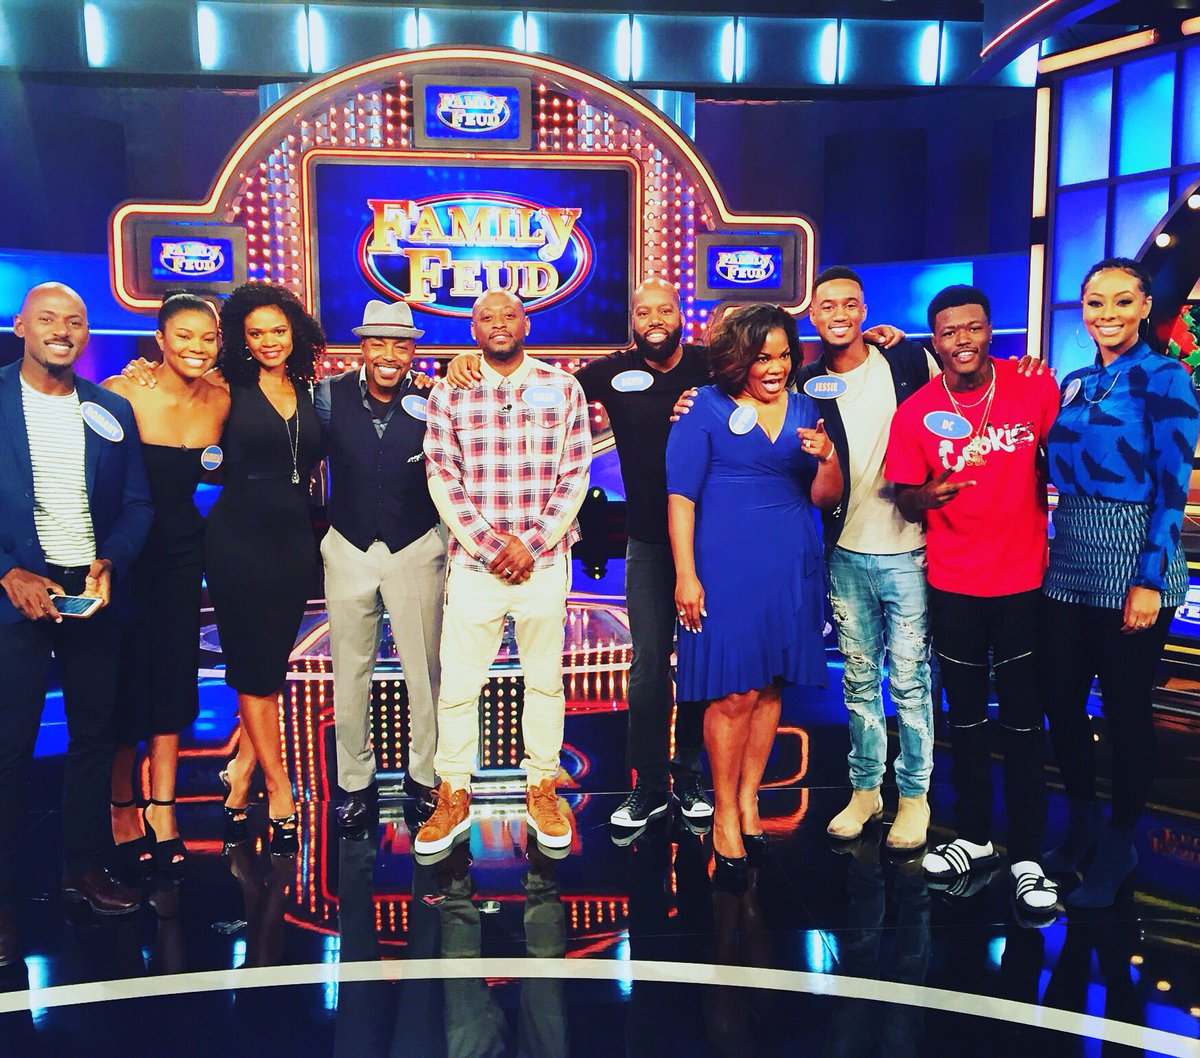 RT @willpowerpacker: Shot #FamilyFeud today with @IAmSteveHarvey & the #AlmostChristmas cast! WAAAYYY too much fun with these cats!!! https…